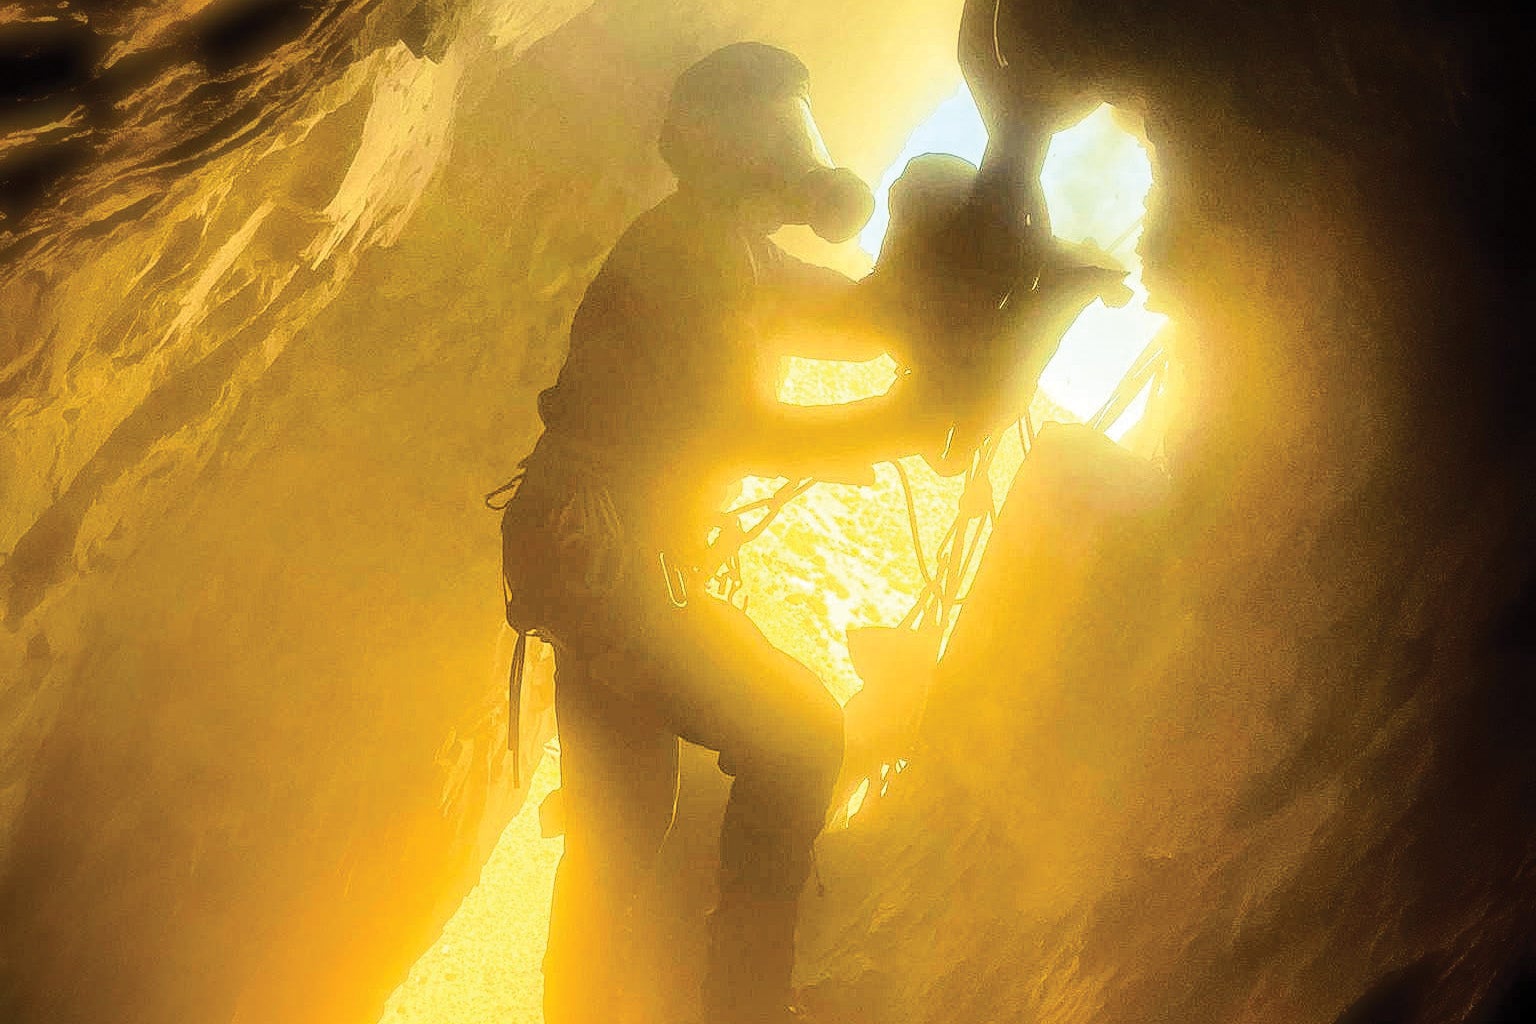 A biologist cuts through a hyrax midden with a saw in a golden-hued image.